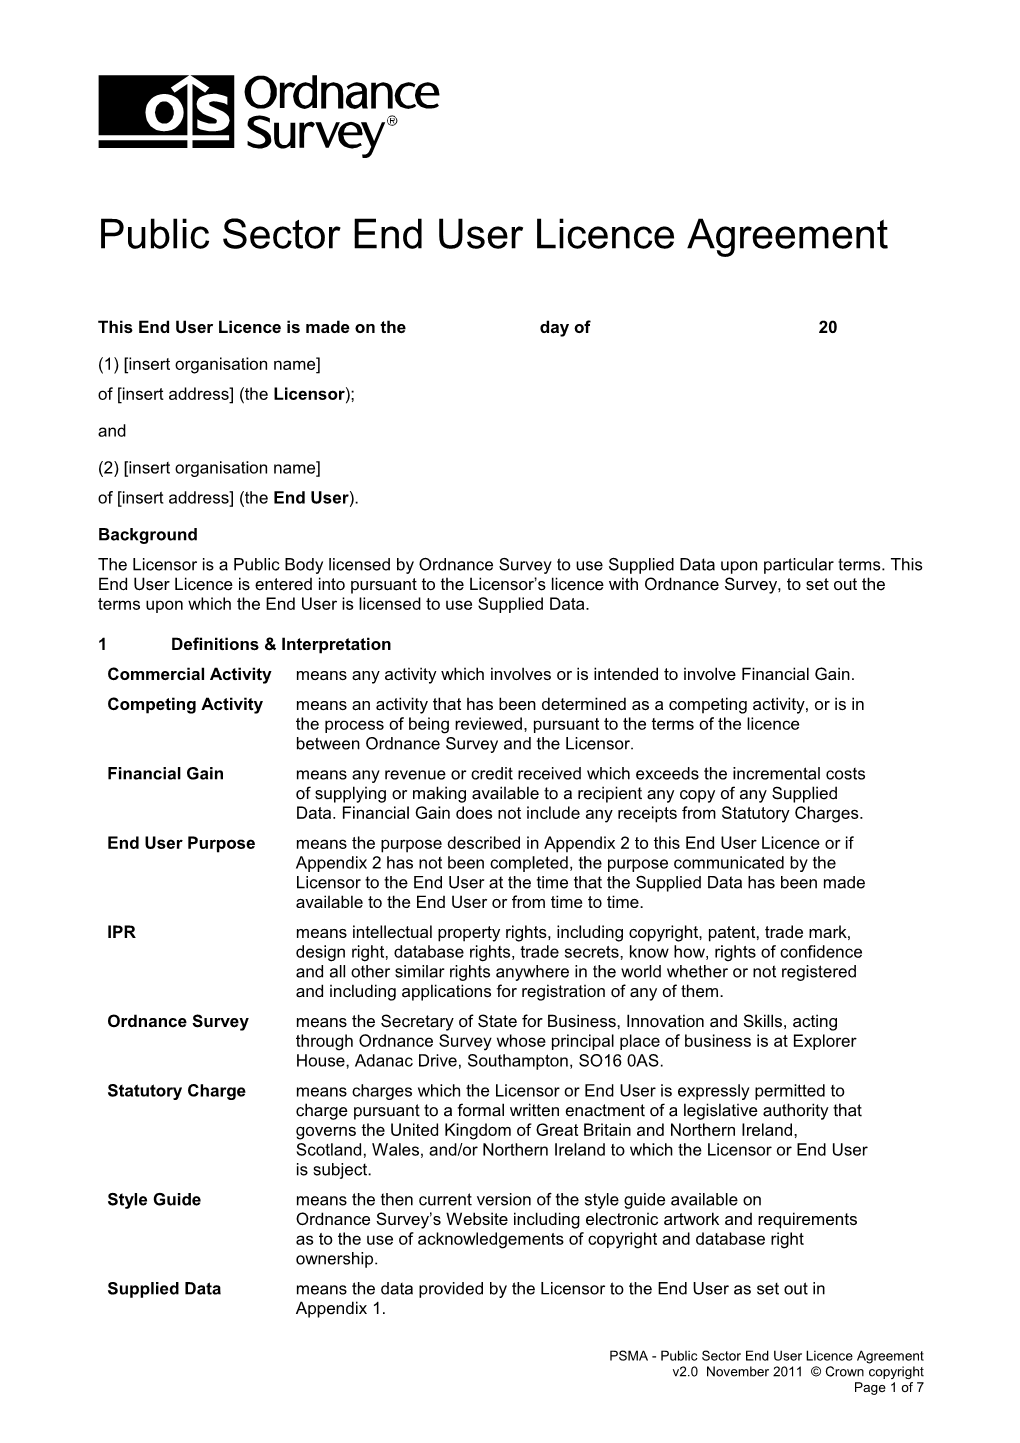 PSMA - Public Sector End User Licence Agreement